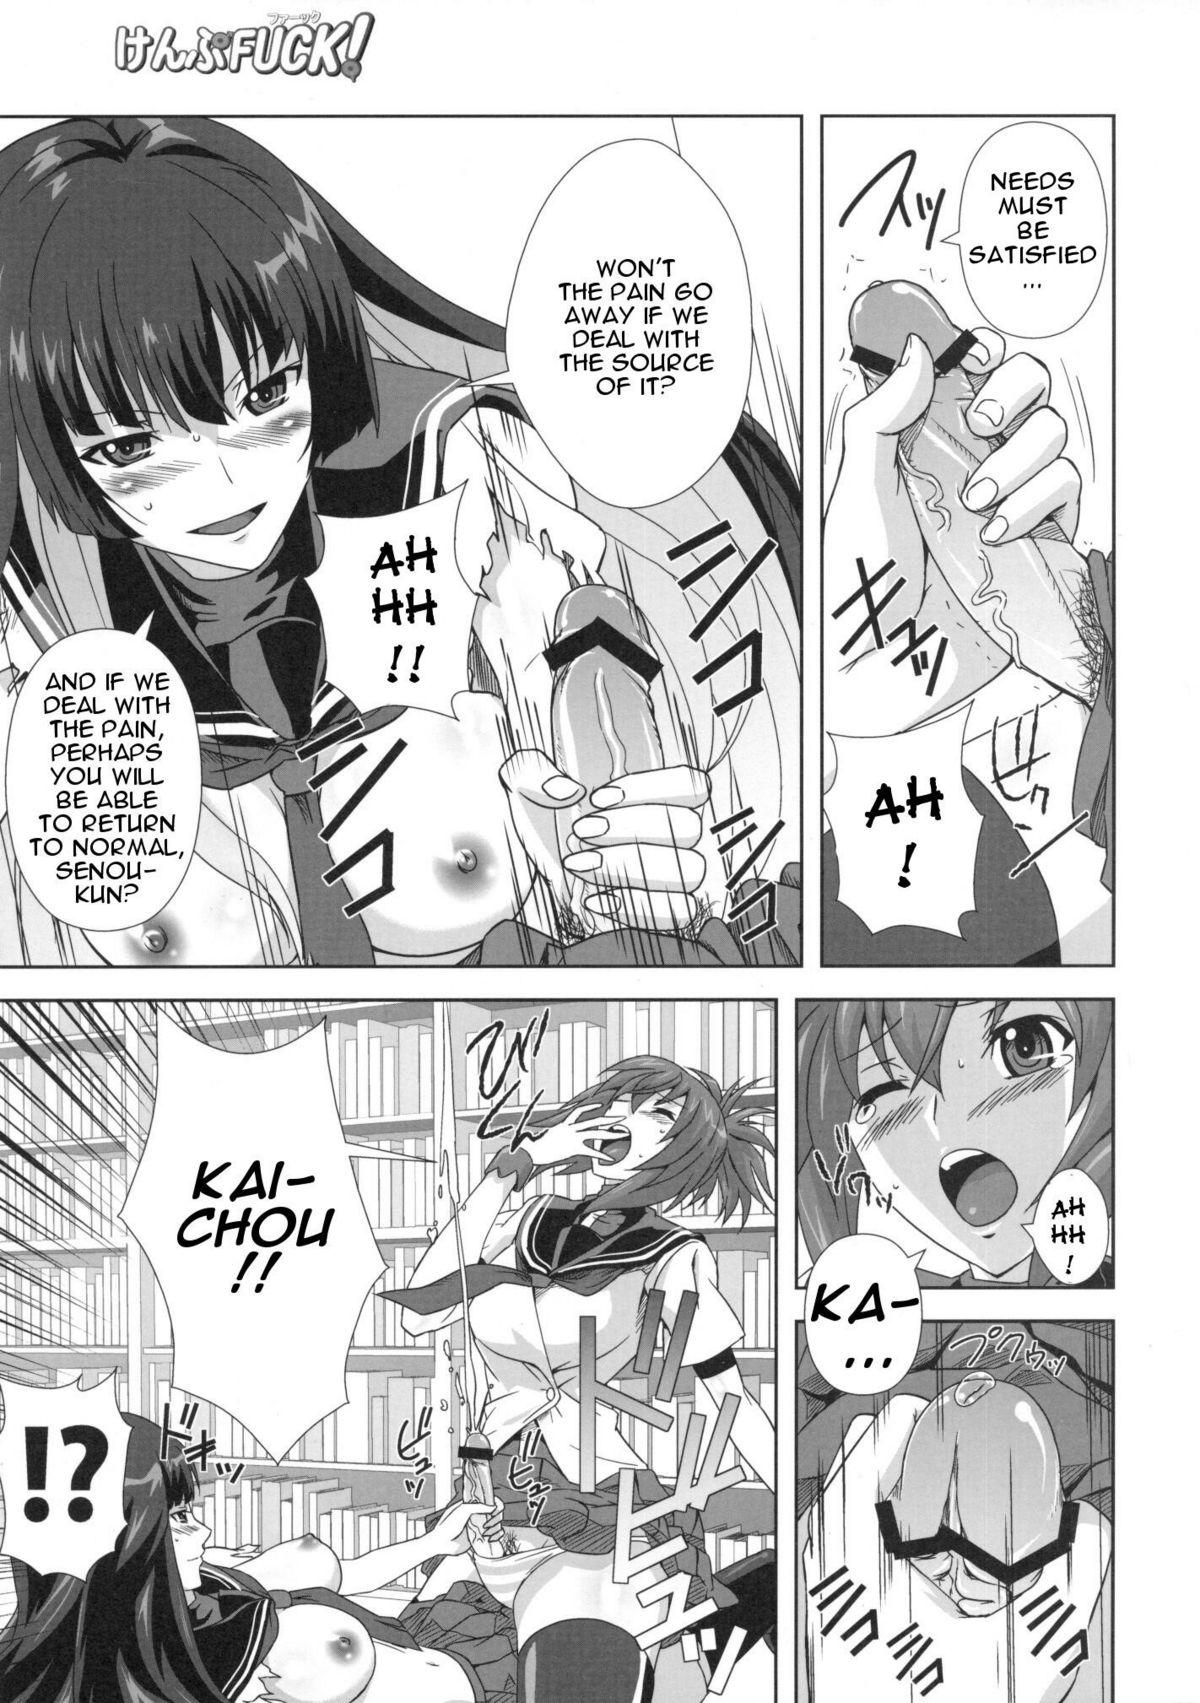 Toes KämpFUCK! - Kampfer Lady - Page 6